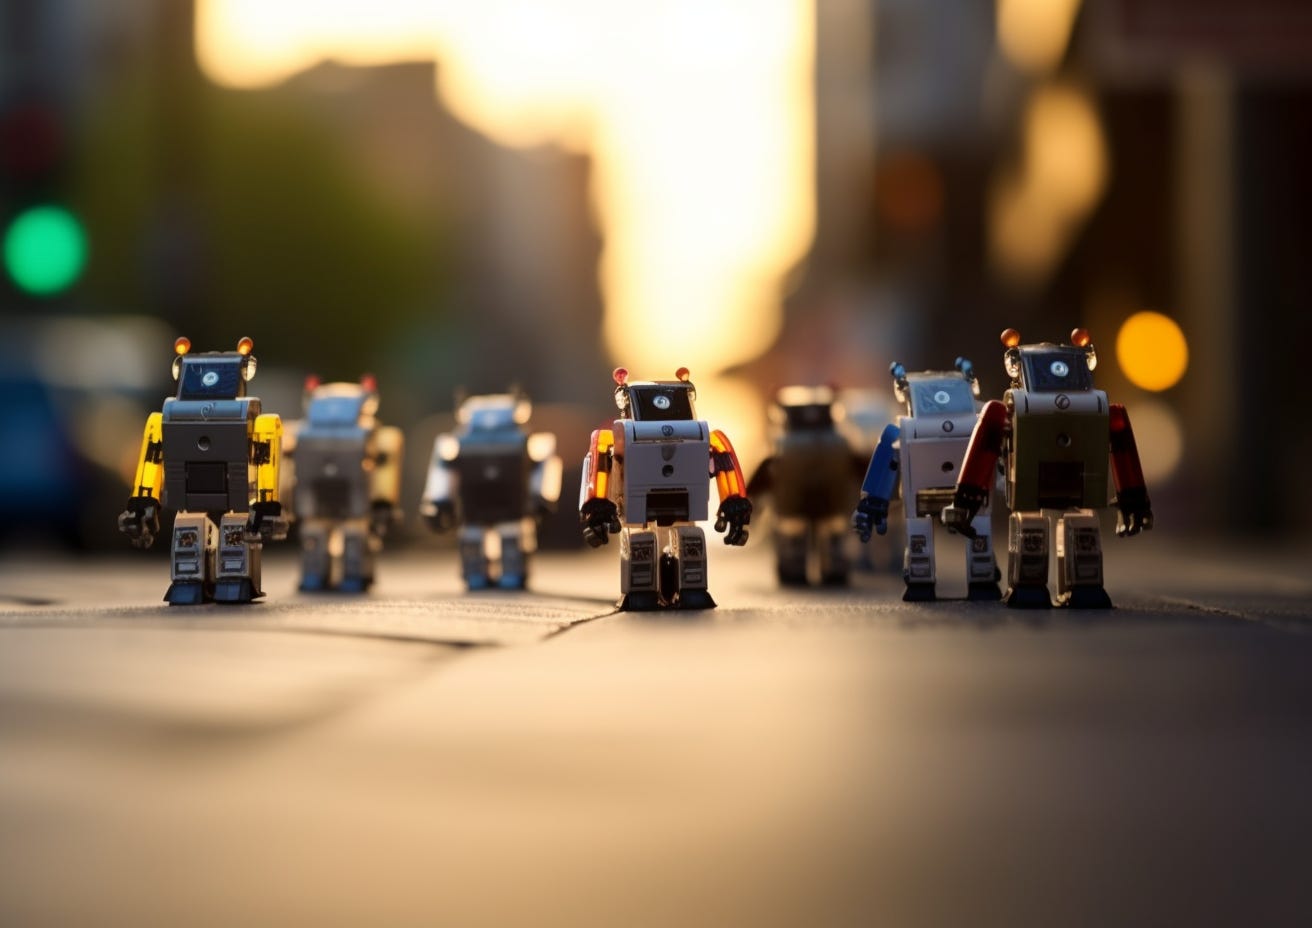 A pack of toy robots walking towards us on a city street at golden hour with shallow depth of field